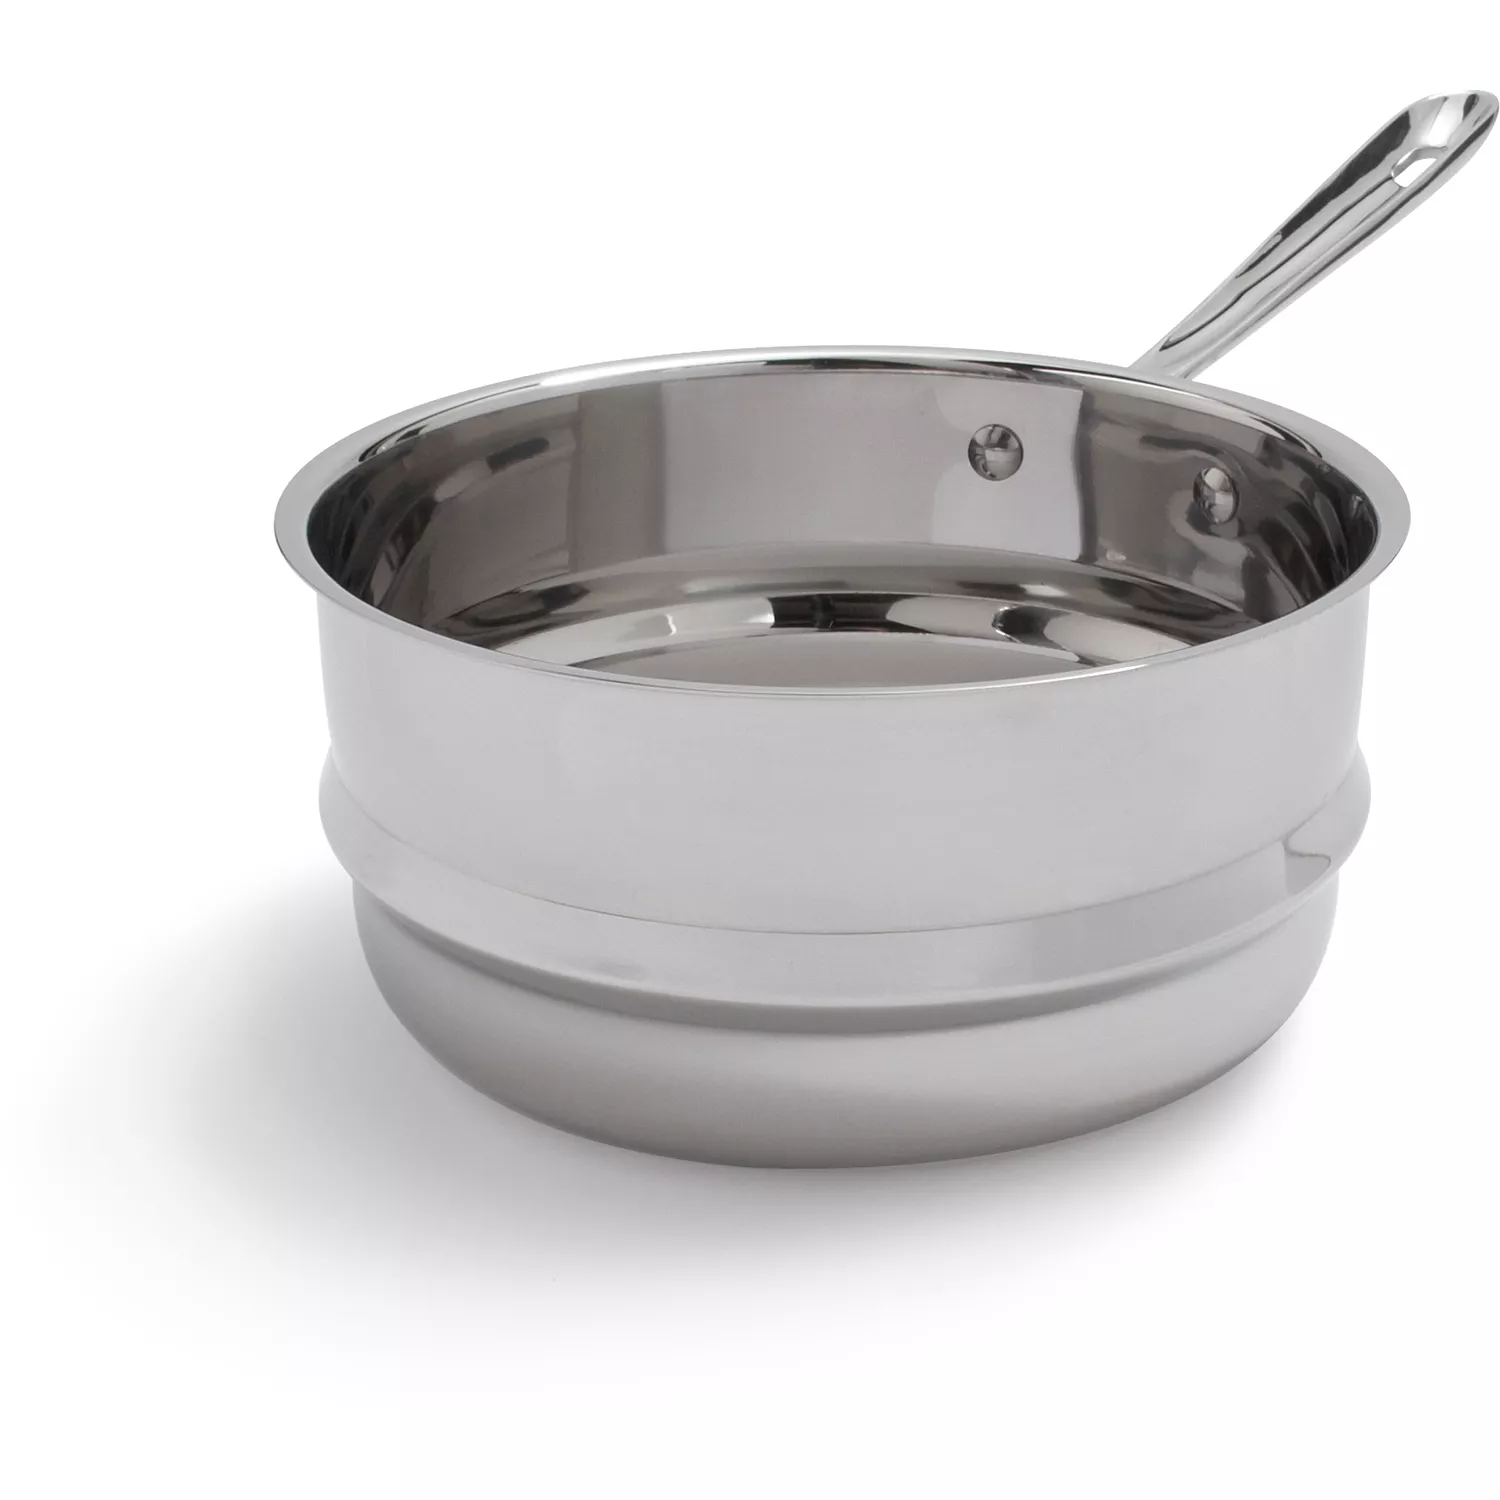 All-Clad All Clad Stainless Steel 3 Quart Universal Steamer Insert